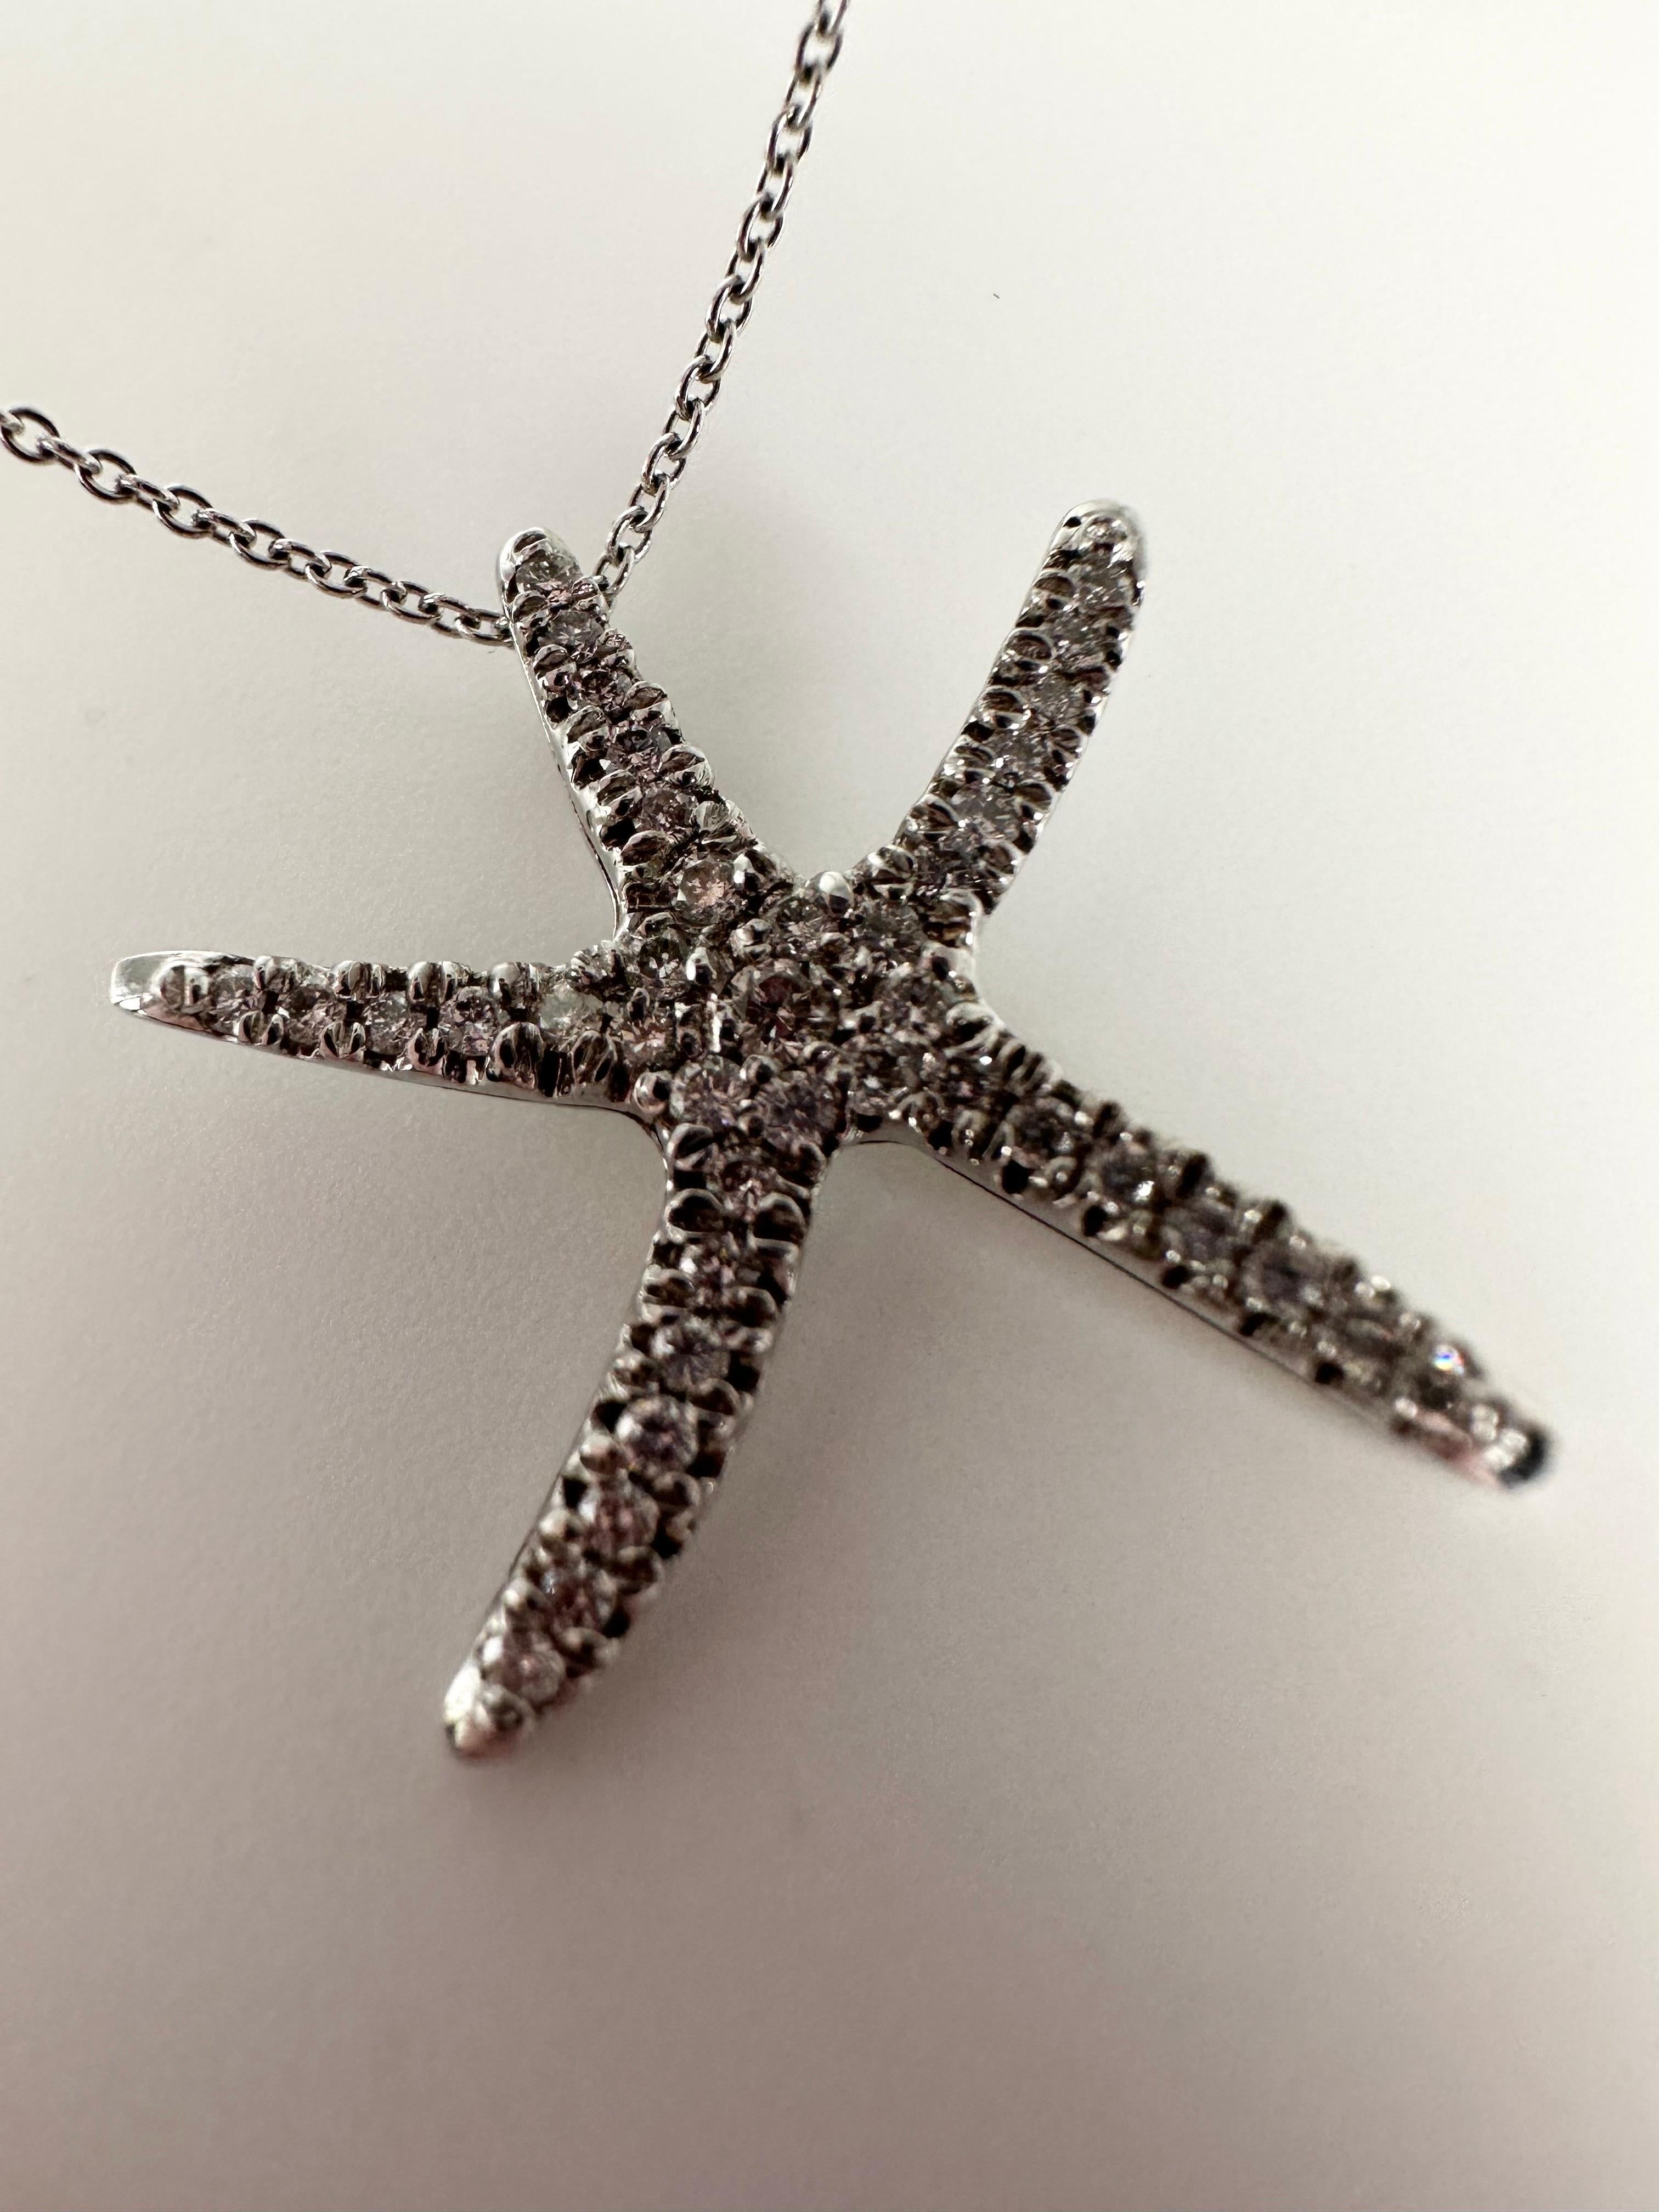 Cute startfish pendant necklace 16 inches long made with natural diamonds and 14KT solid white gold.

GOLD: 14KT gold/16